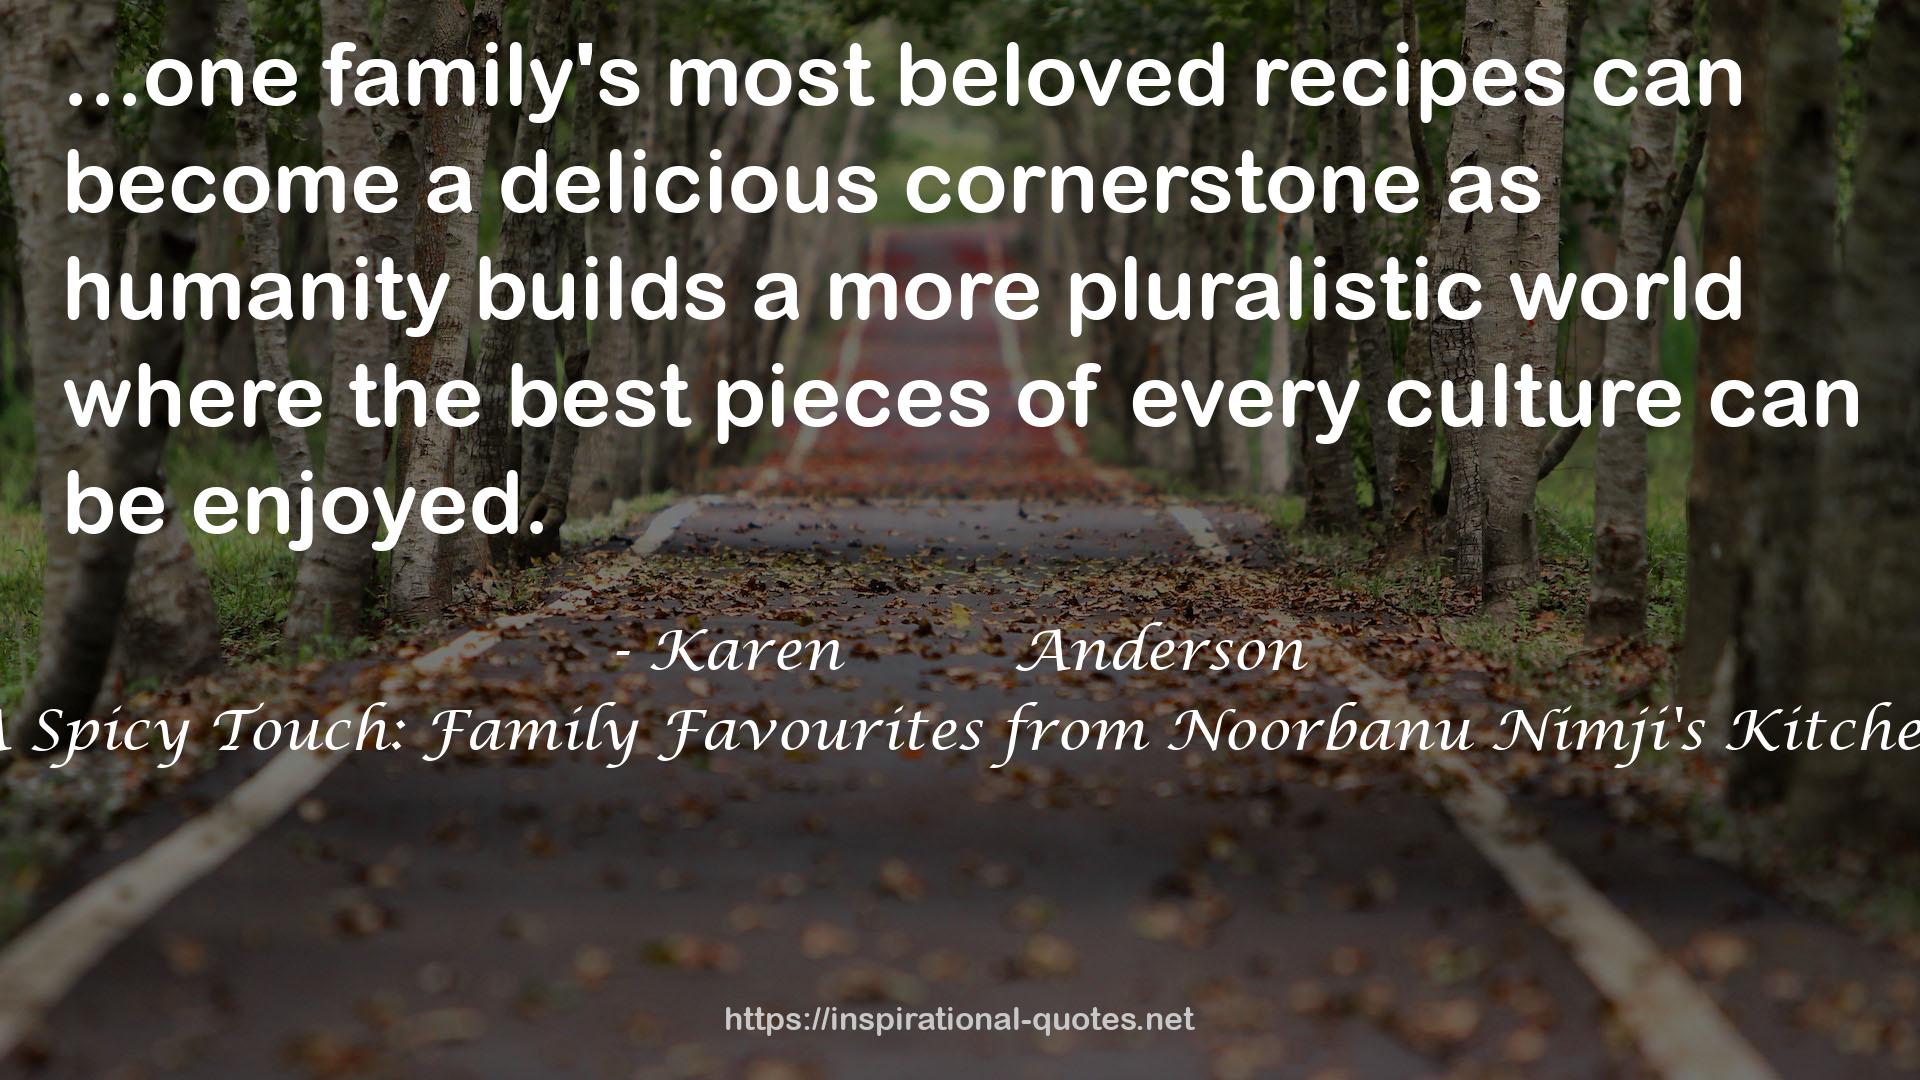 A Spicy Touch: Family Favourites from Noorbanu Nimji's Kitchen QUOTES